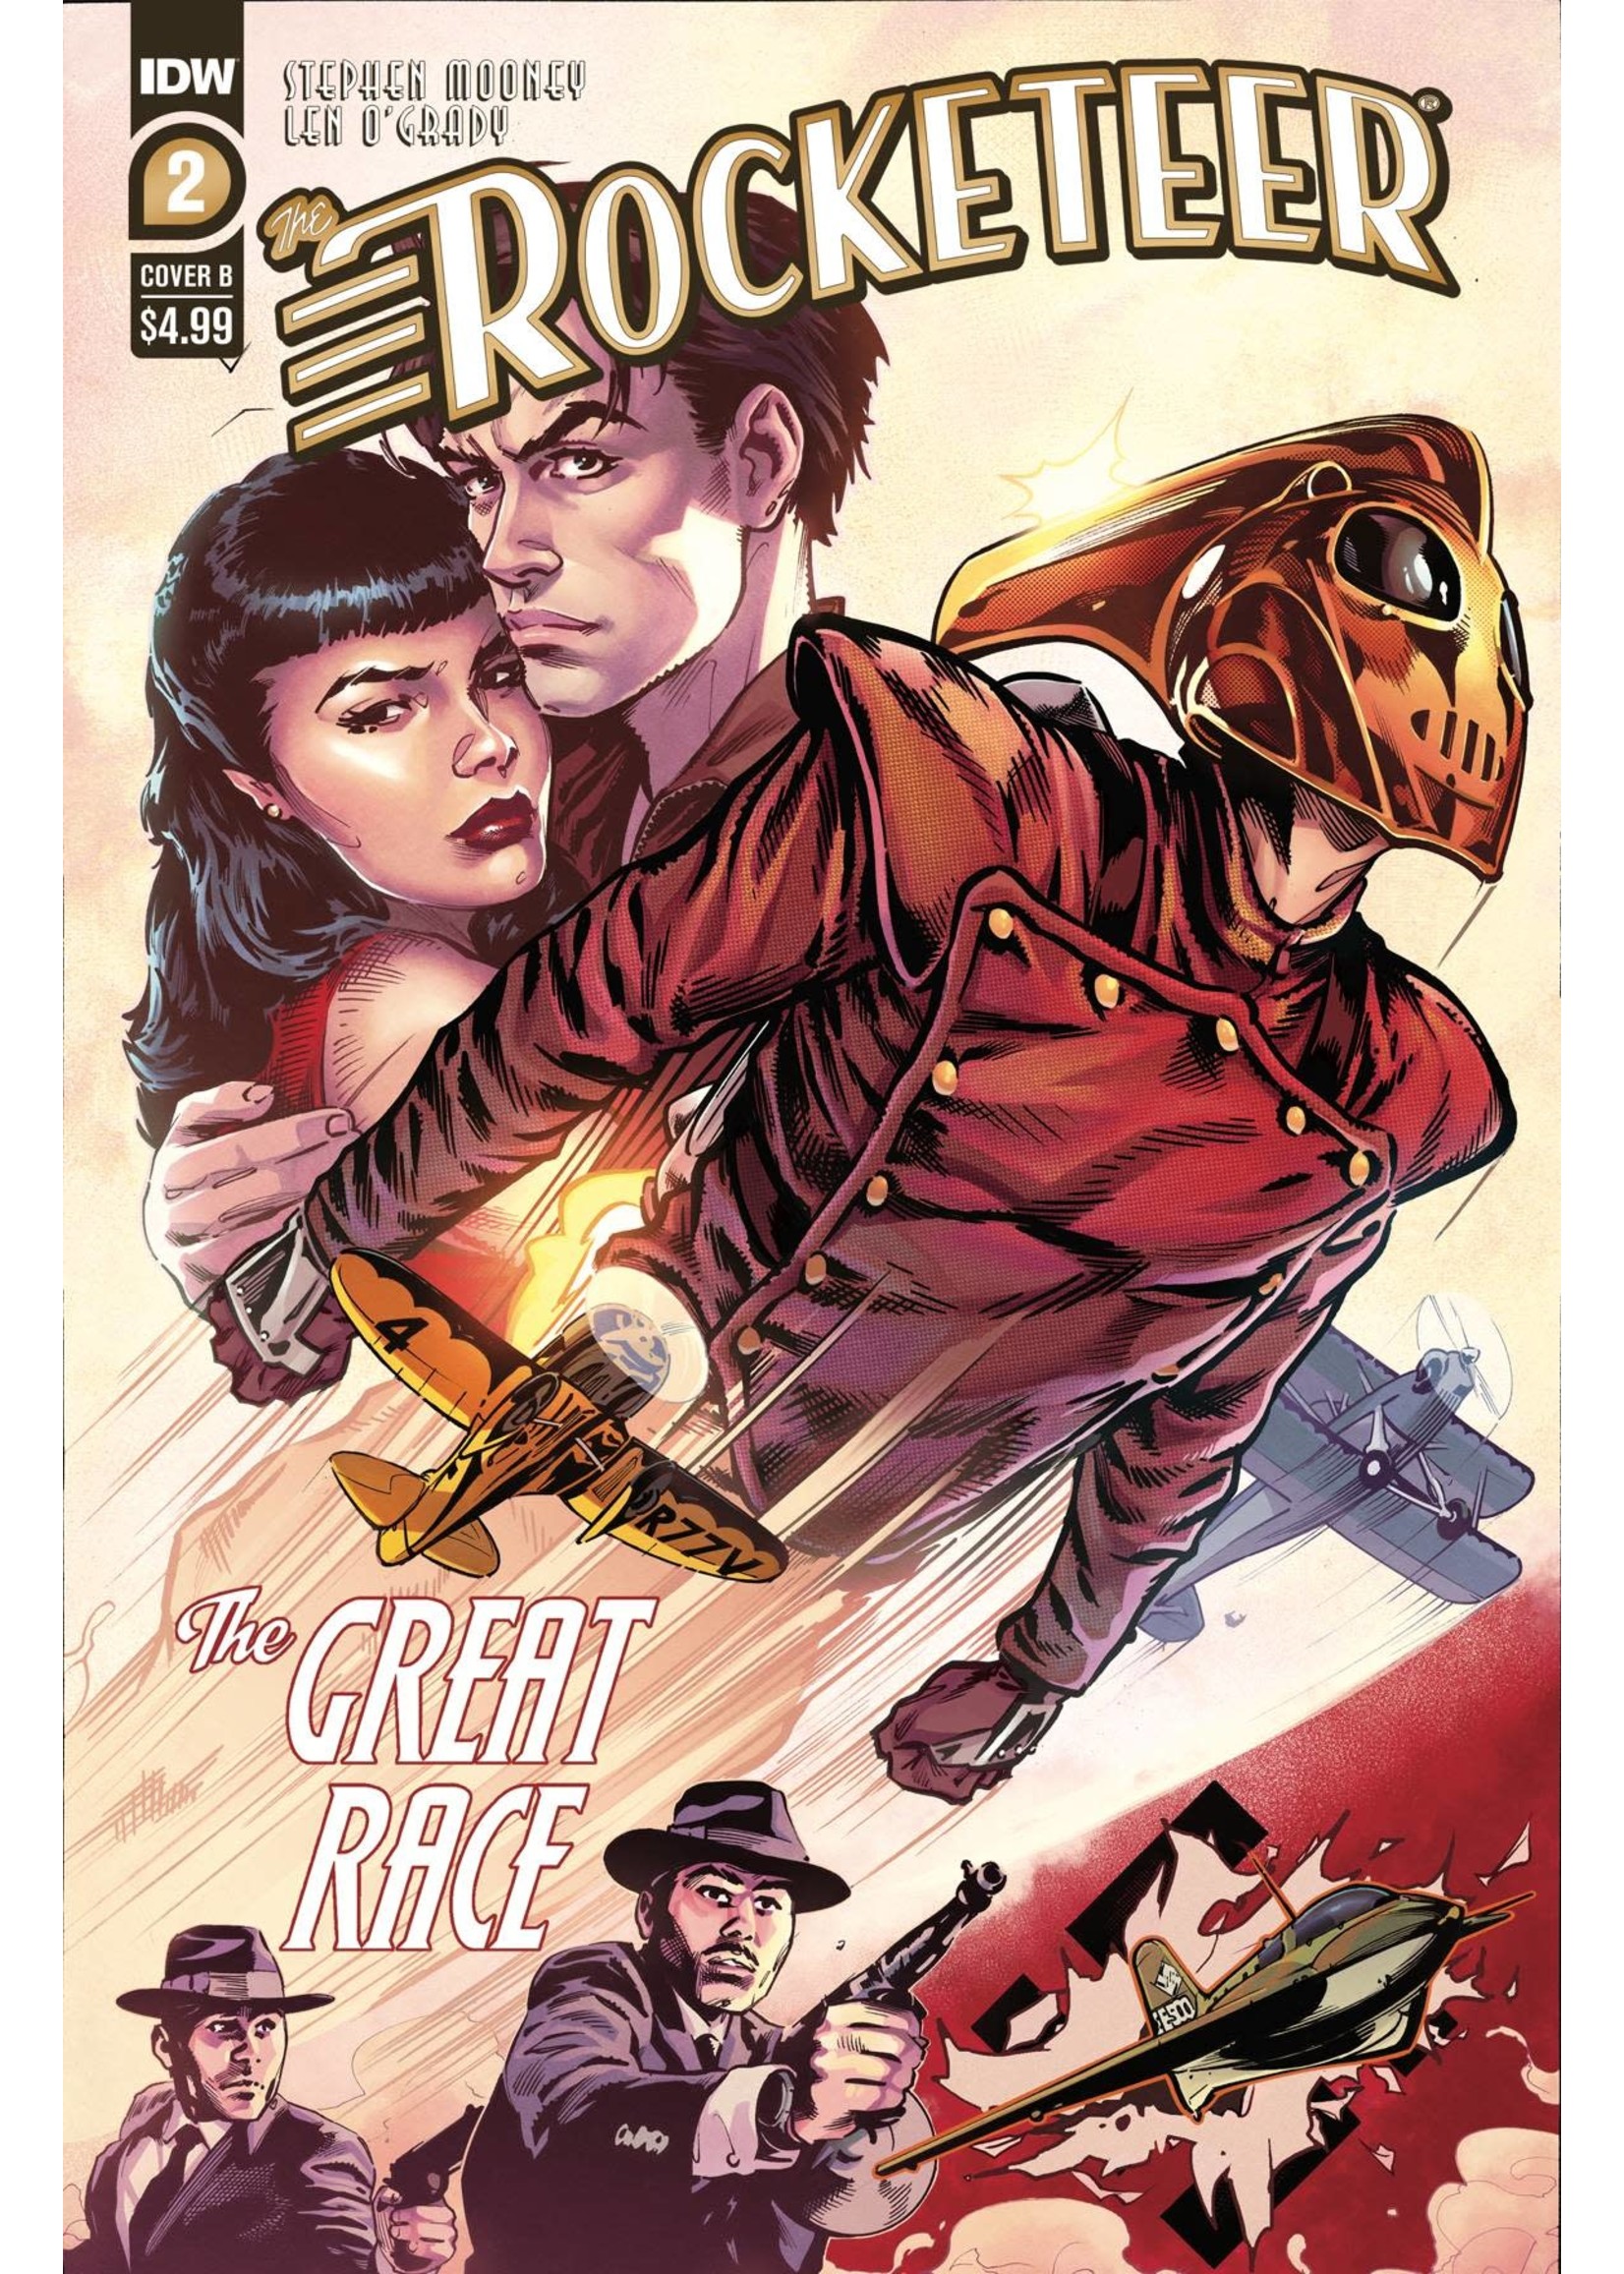 Rocketeer: The Great Race #2 (of 4)